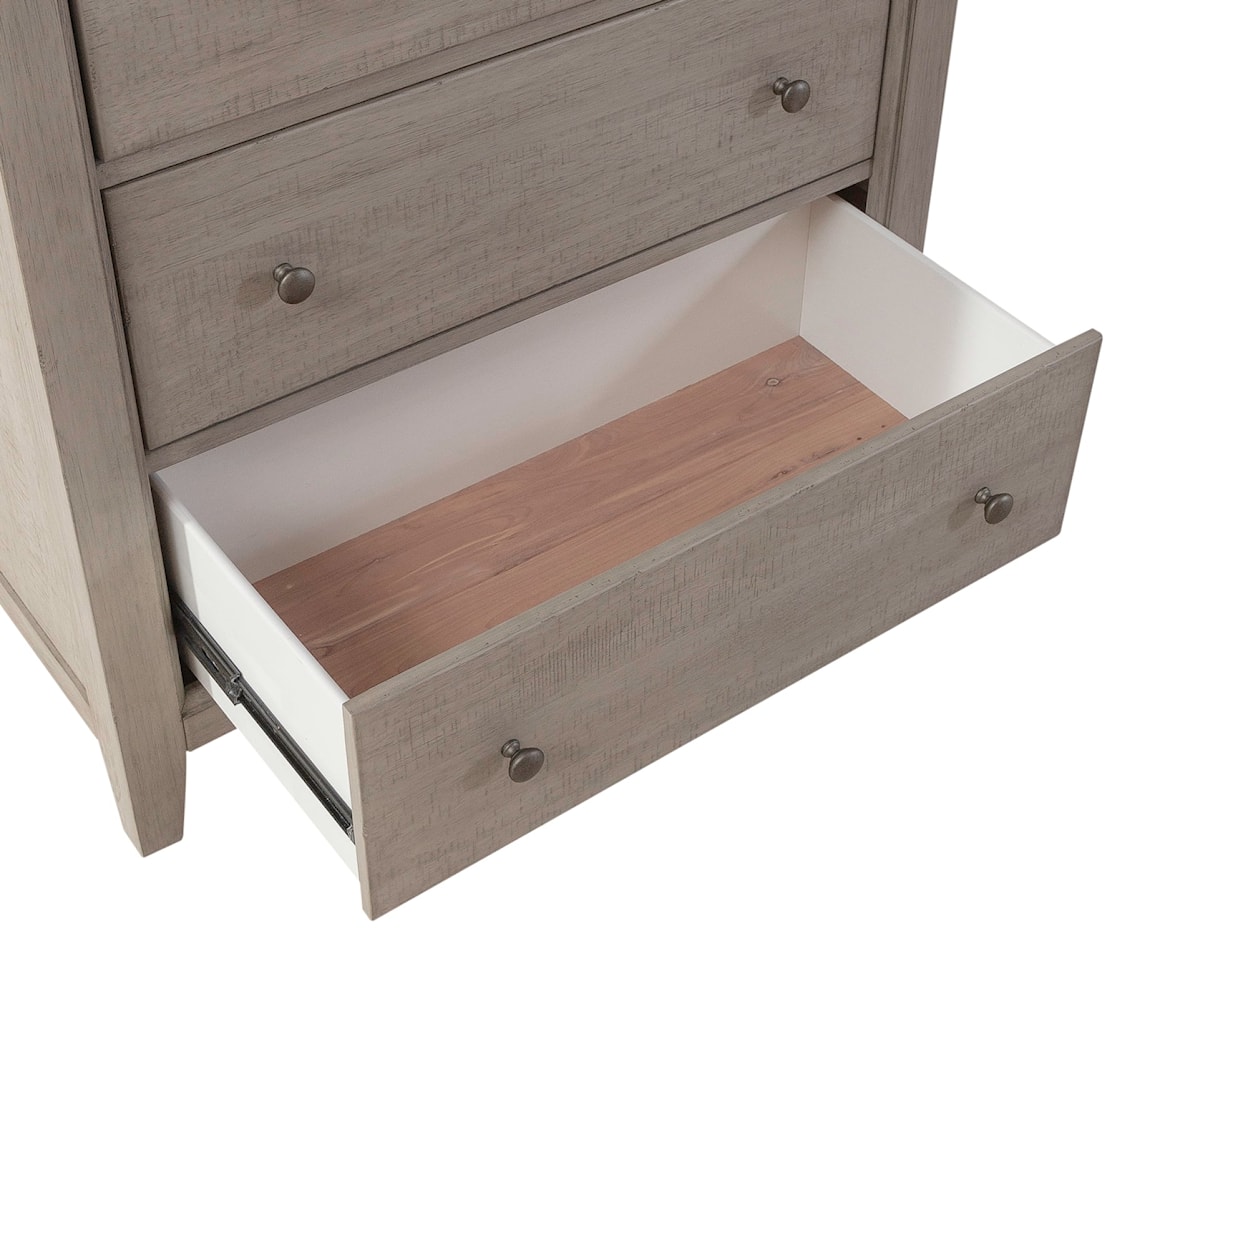 Libby Ivy Hollow 5-Drawer Bedroom Chest